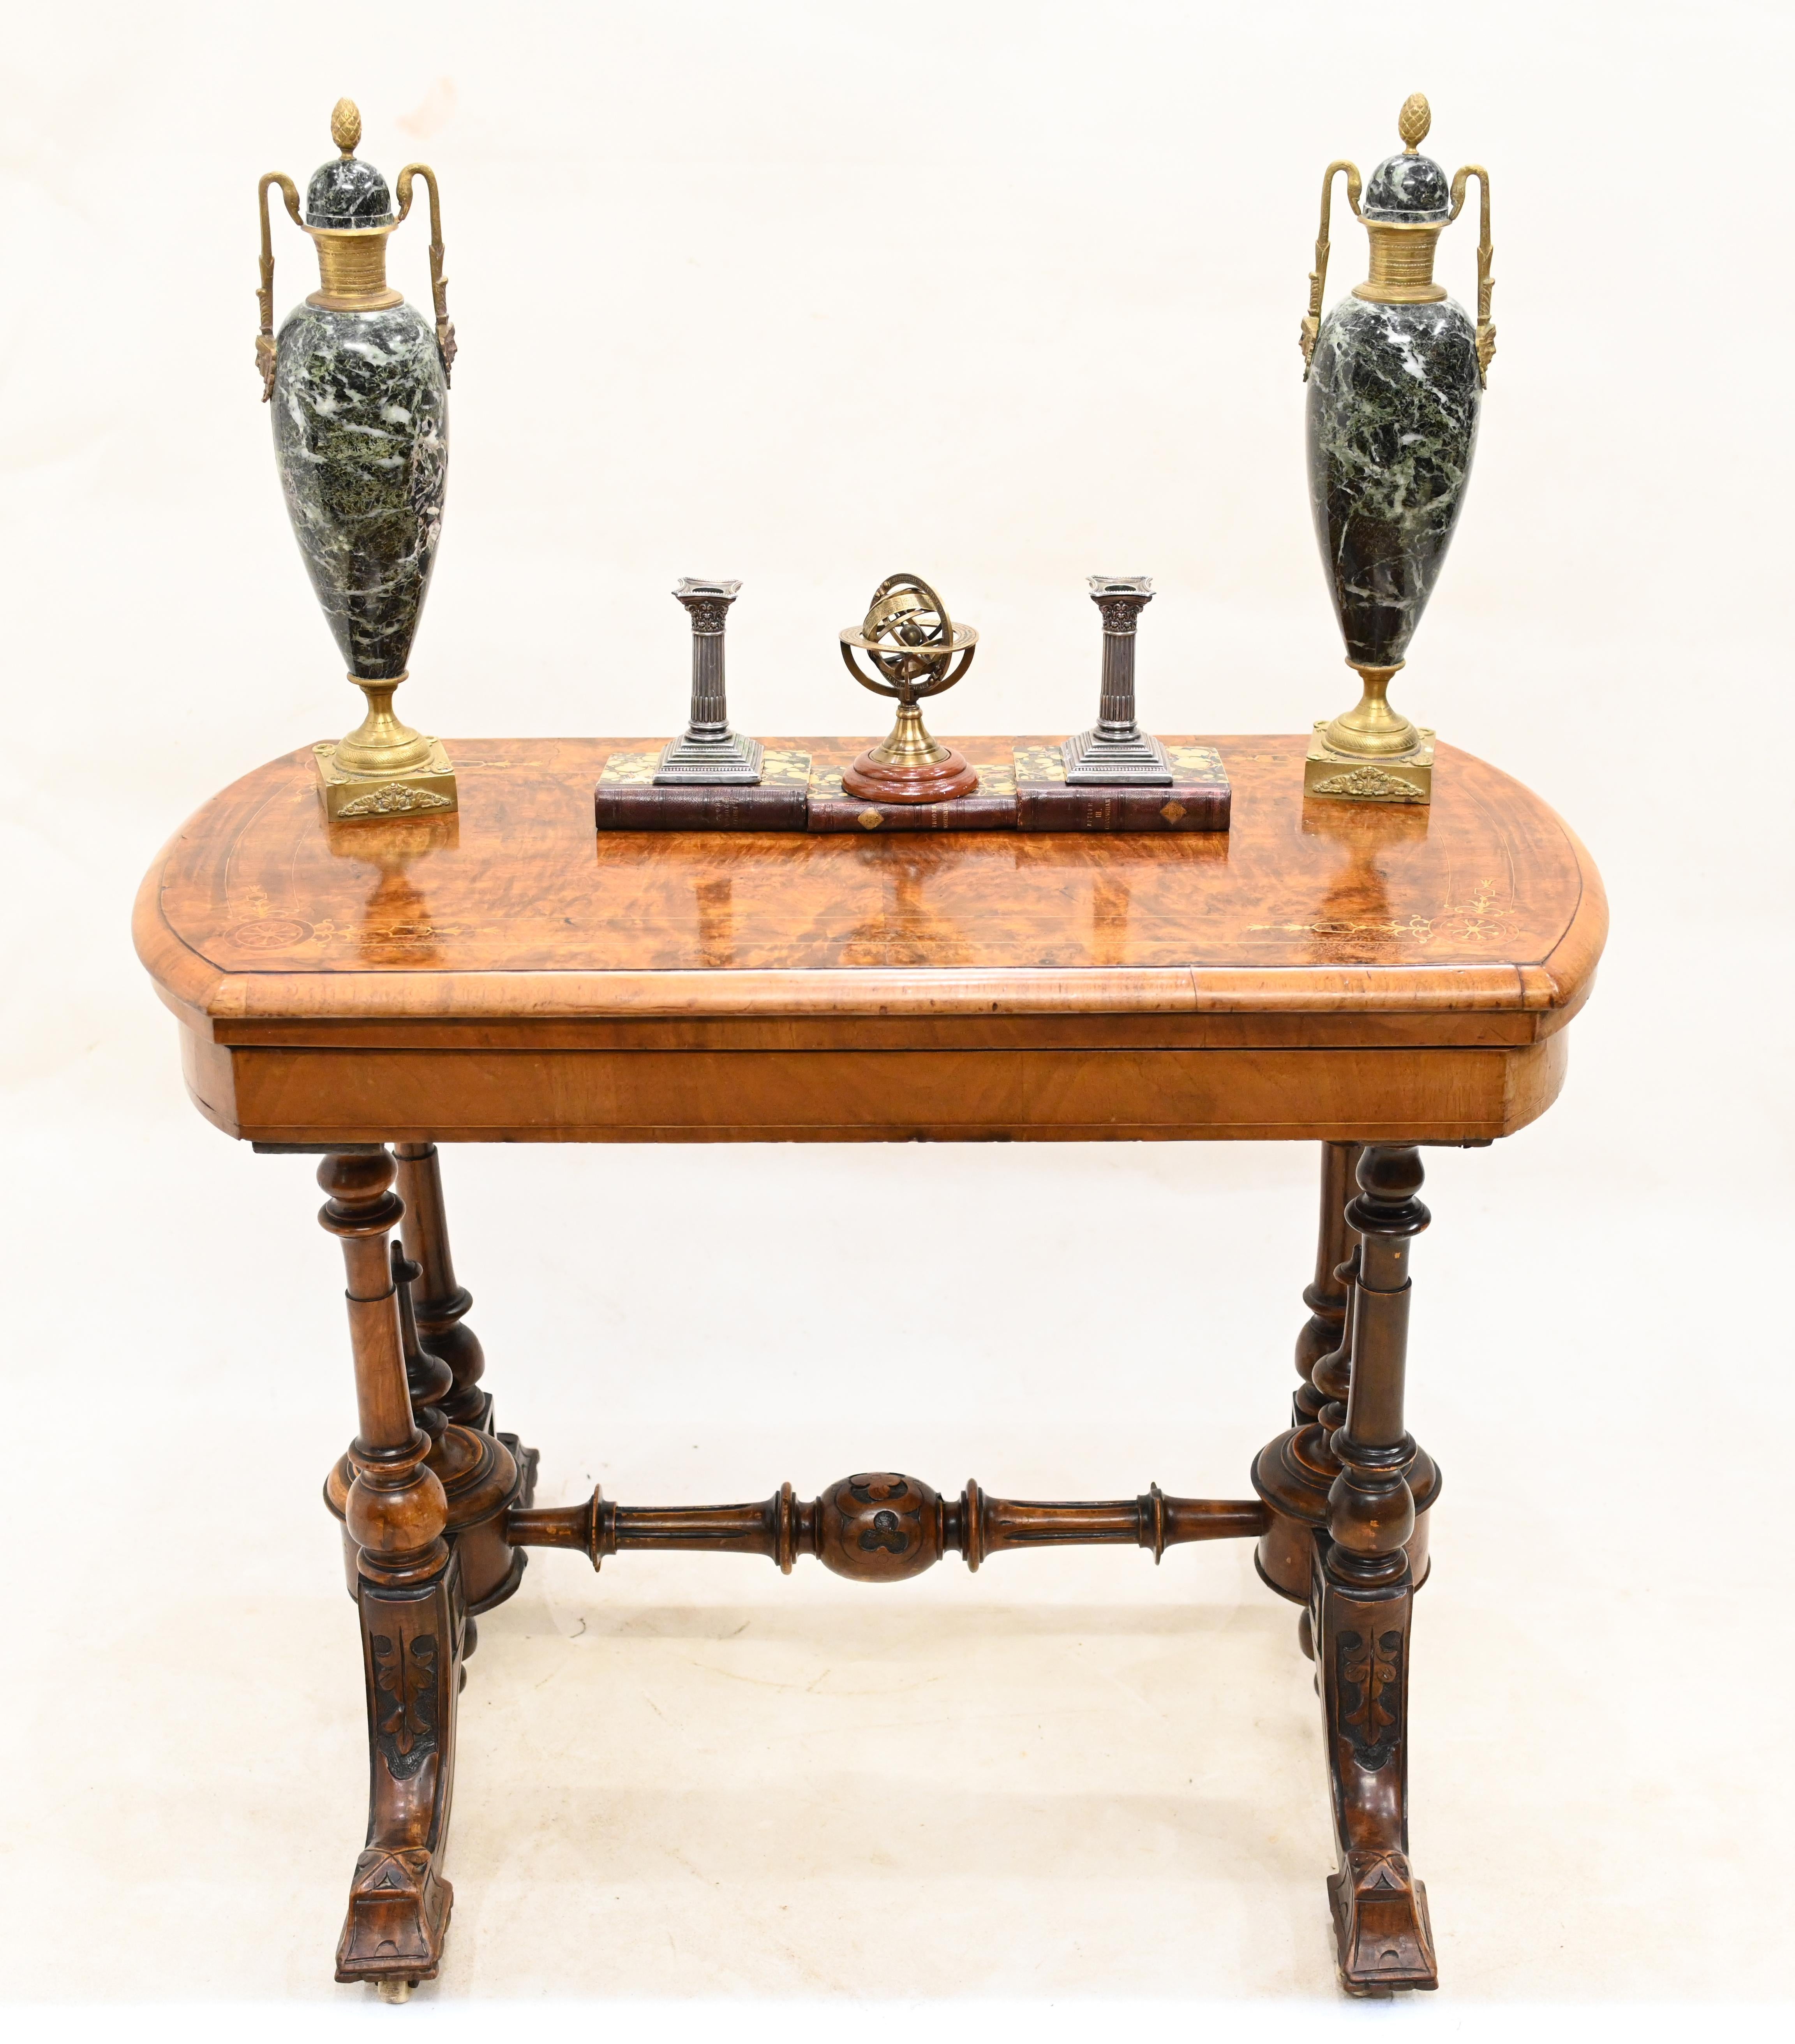 Nice Victorian games or card table in burr walnut
Circa 1880 on this collectable antique
Features a fold over top which opens out to reveal the beize lined playing surface
Bought from a private residence in London's Hampstead
Offered in great shape